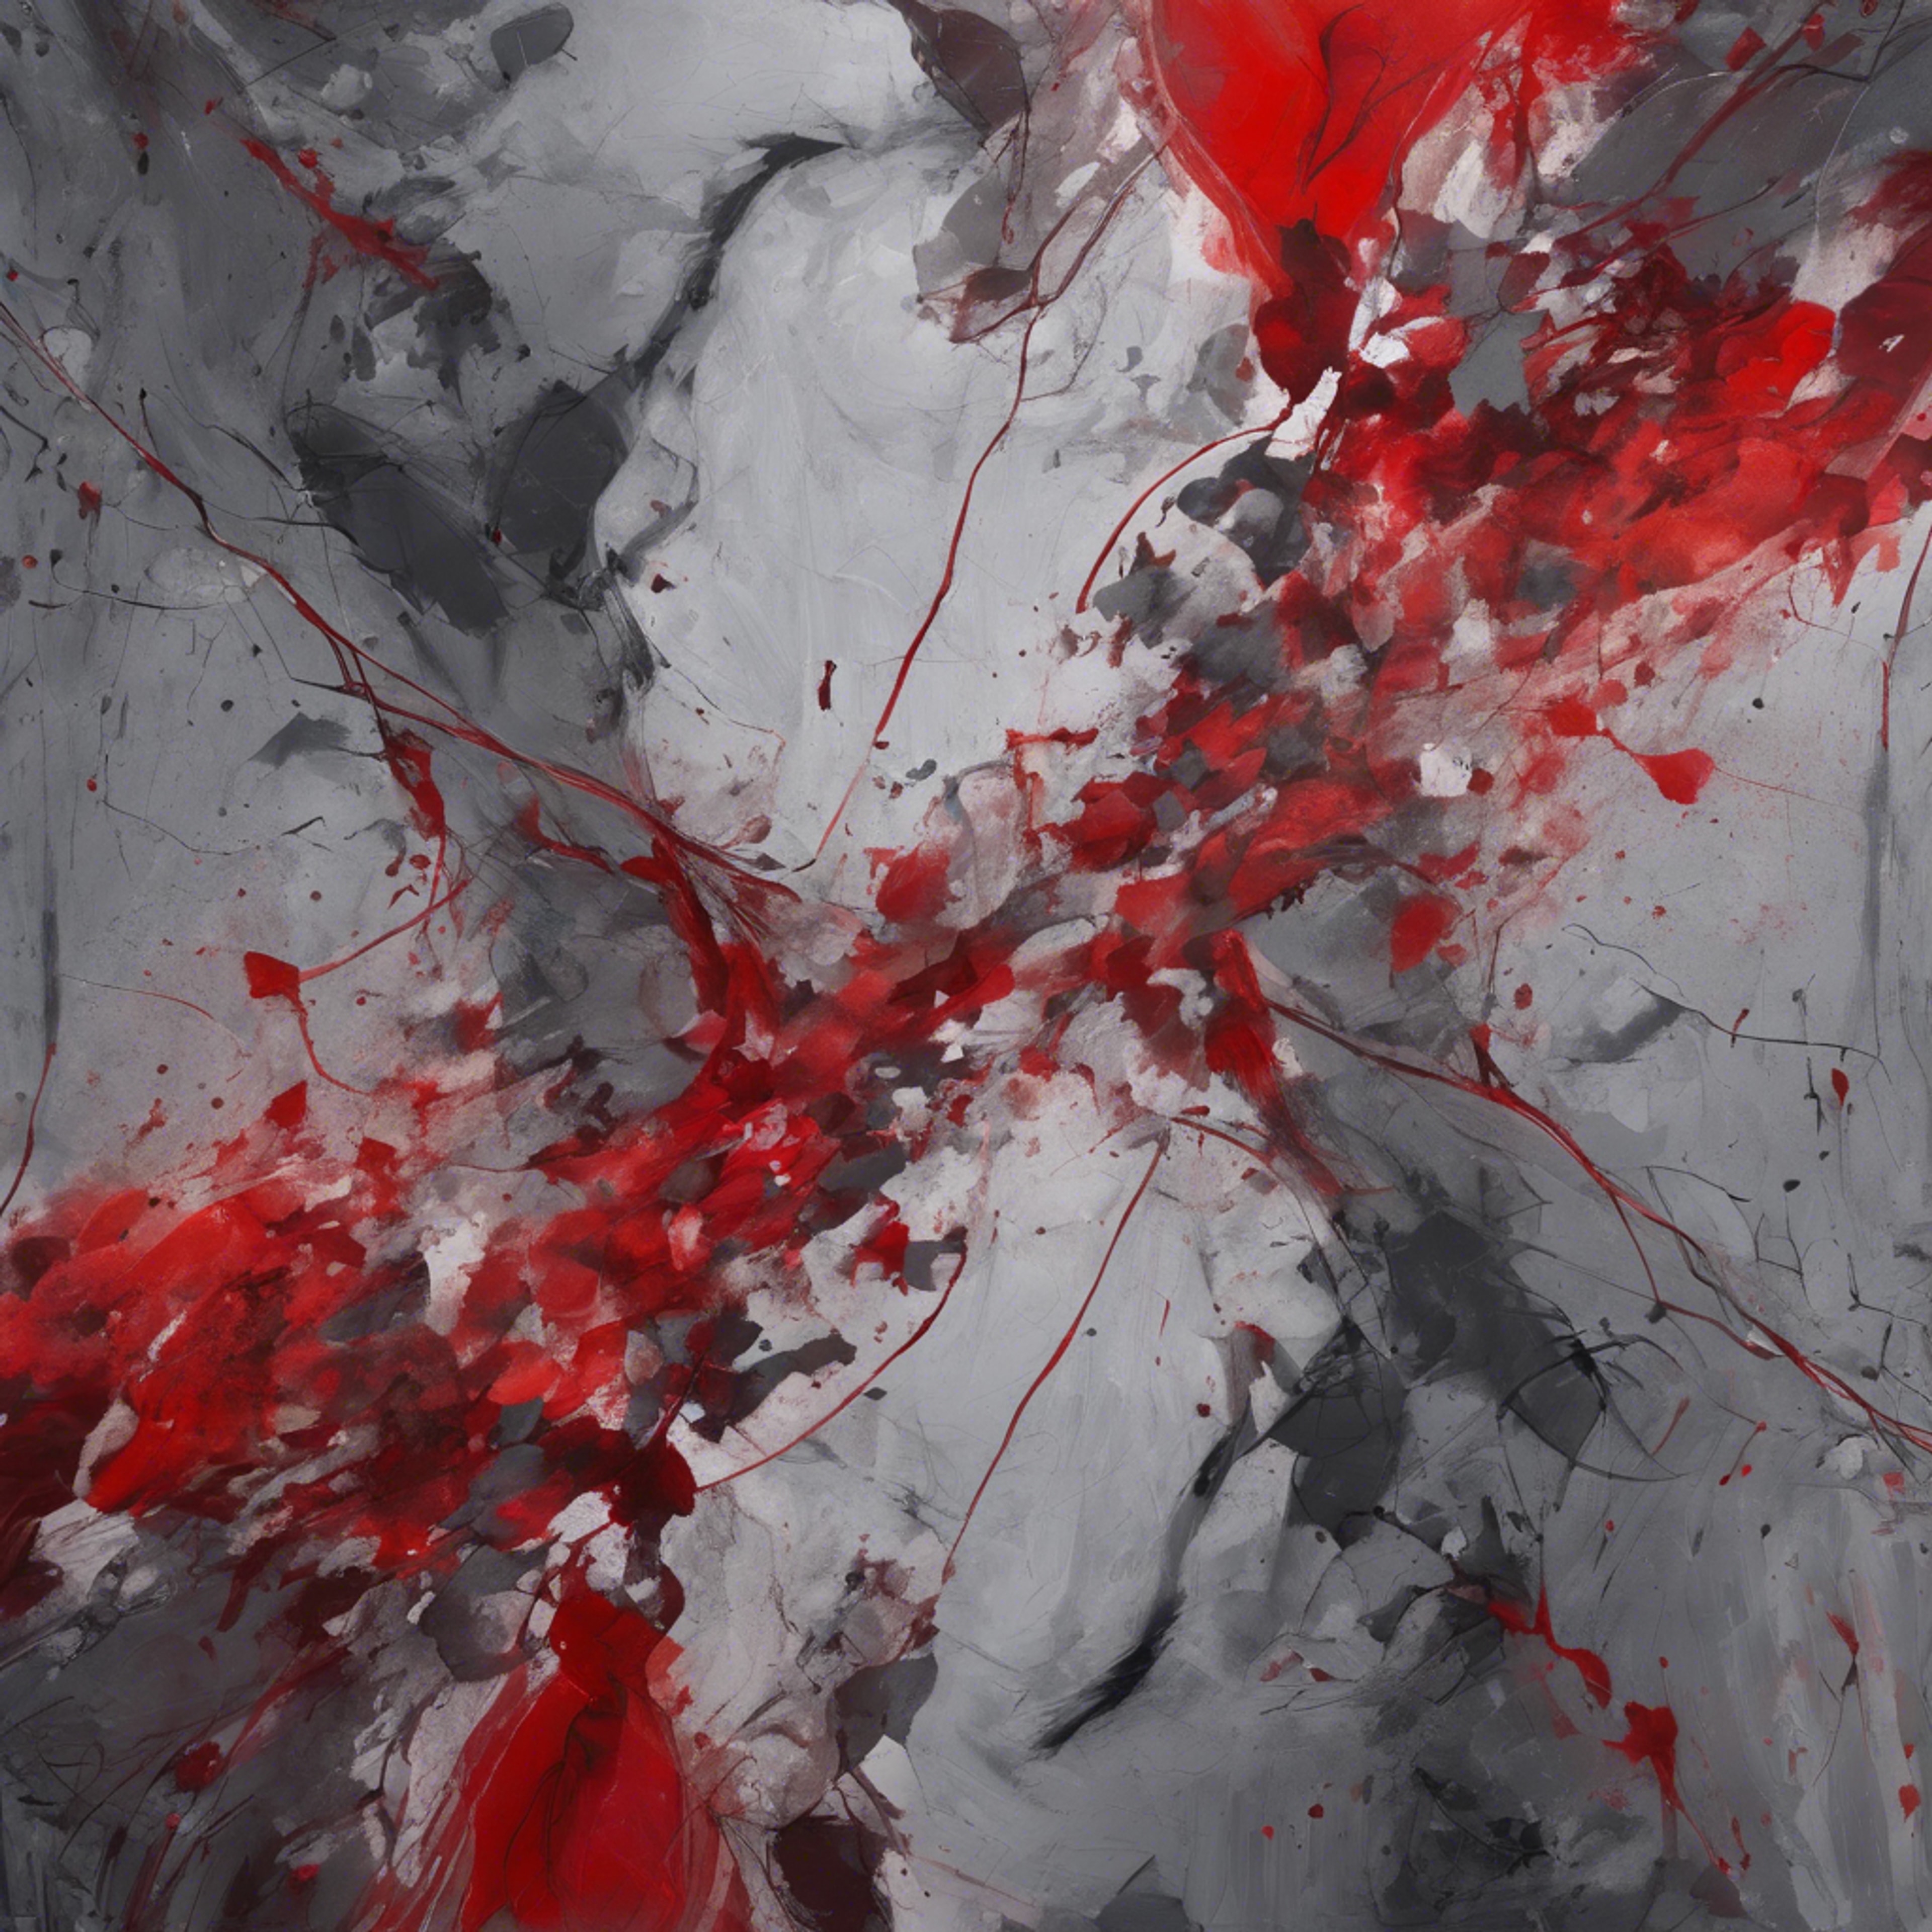 A red and gray abstract painting demonstrating the battle between passion and reason. 牆紙[fb490a5db02d428289d0]